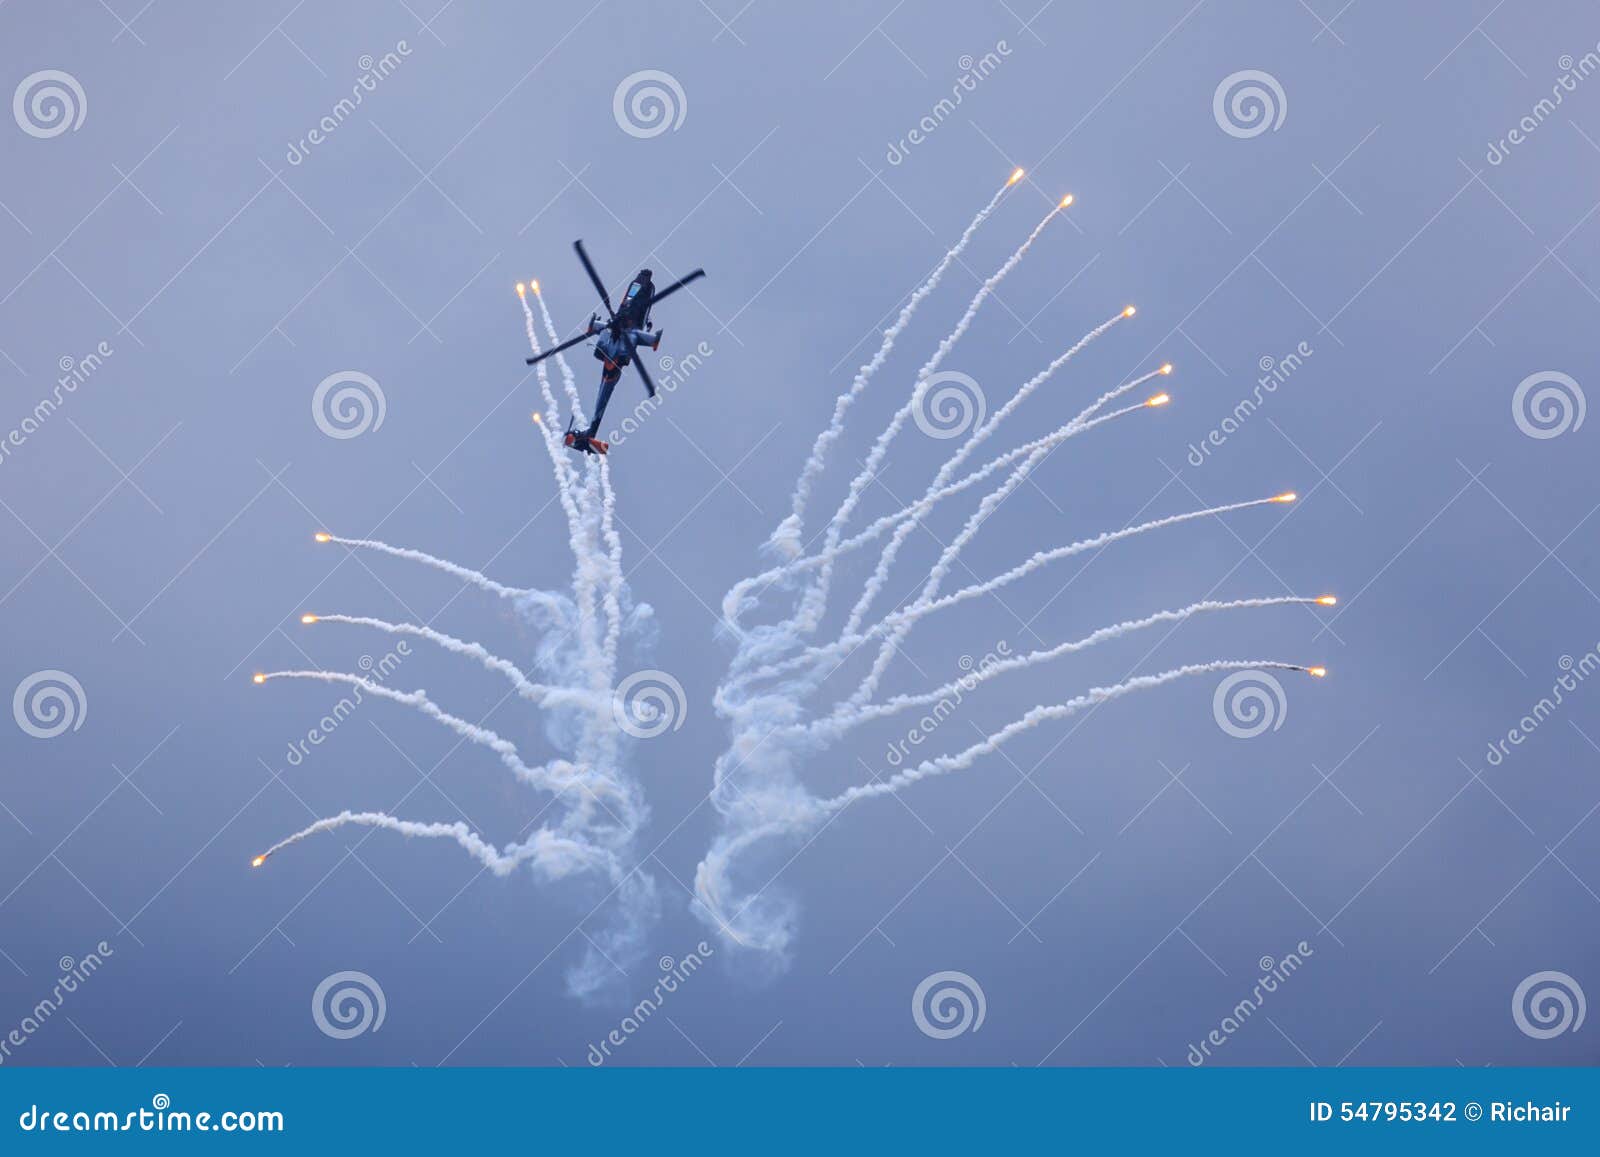 helicopter releasing flares